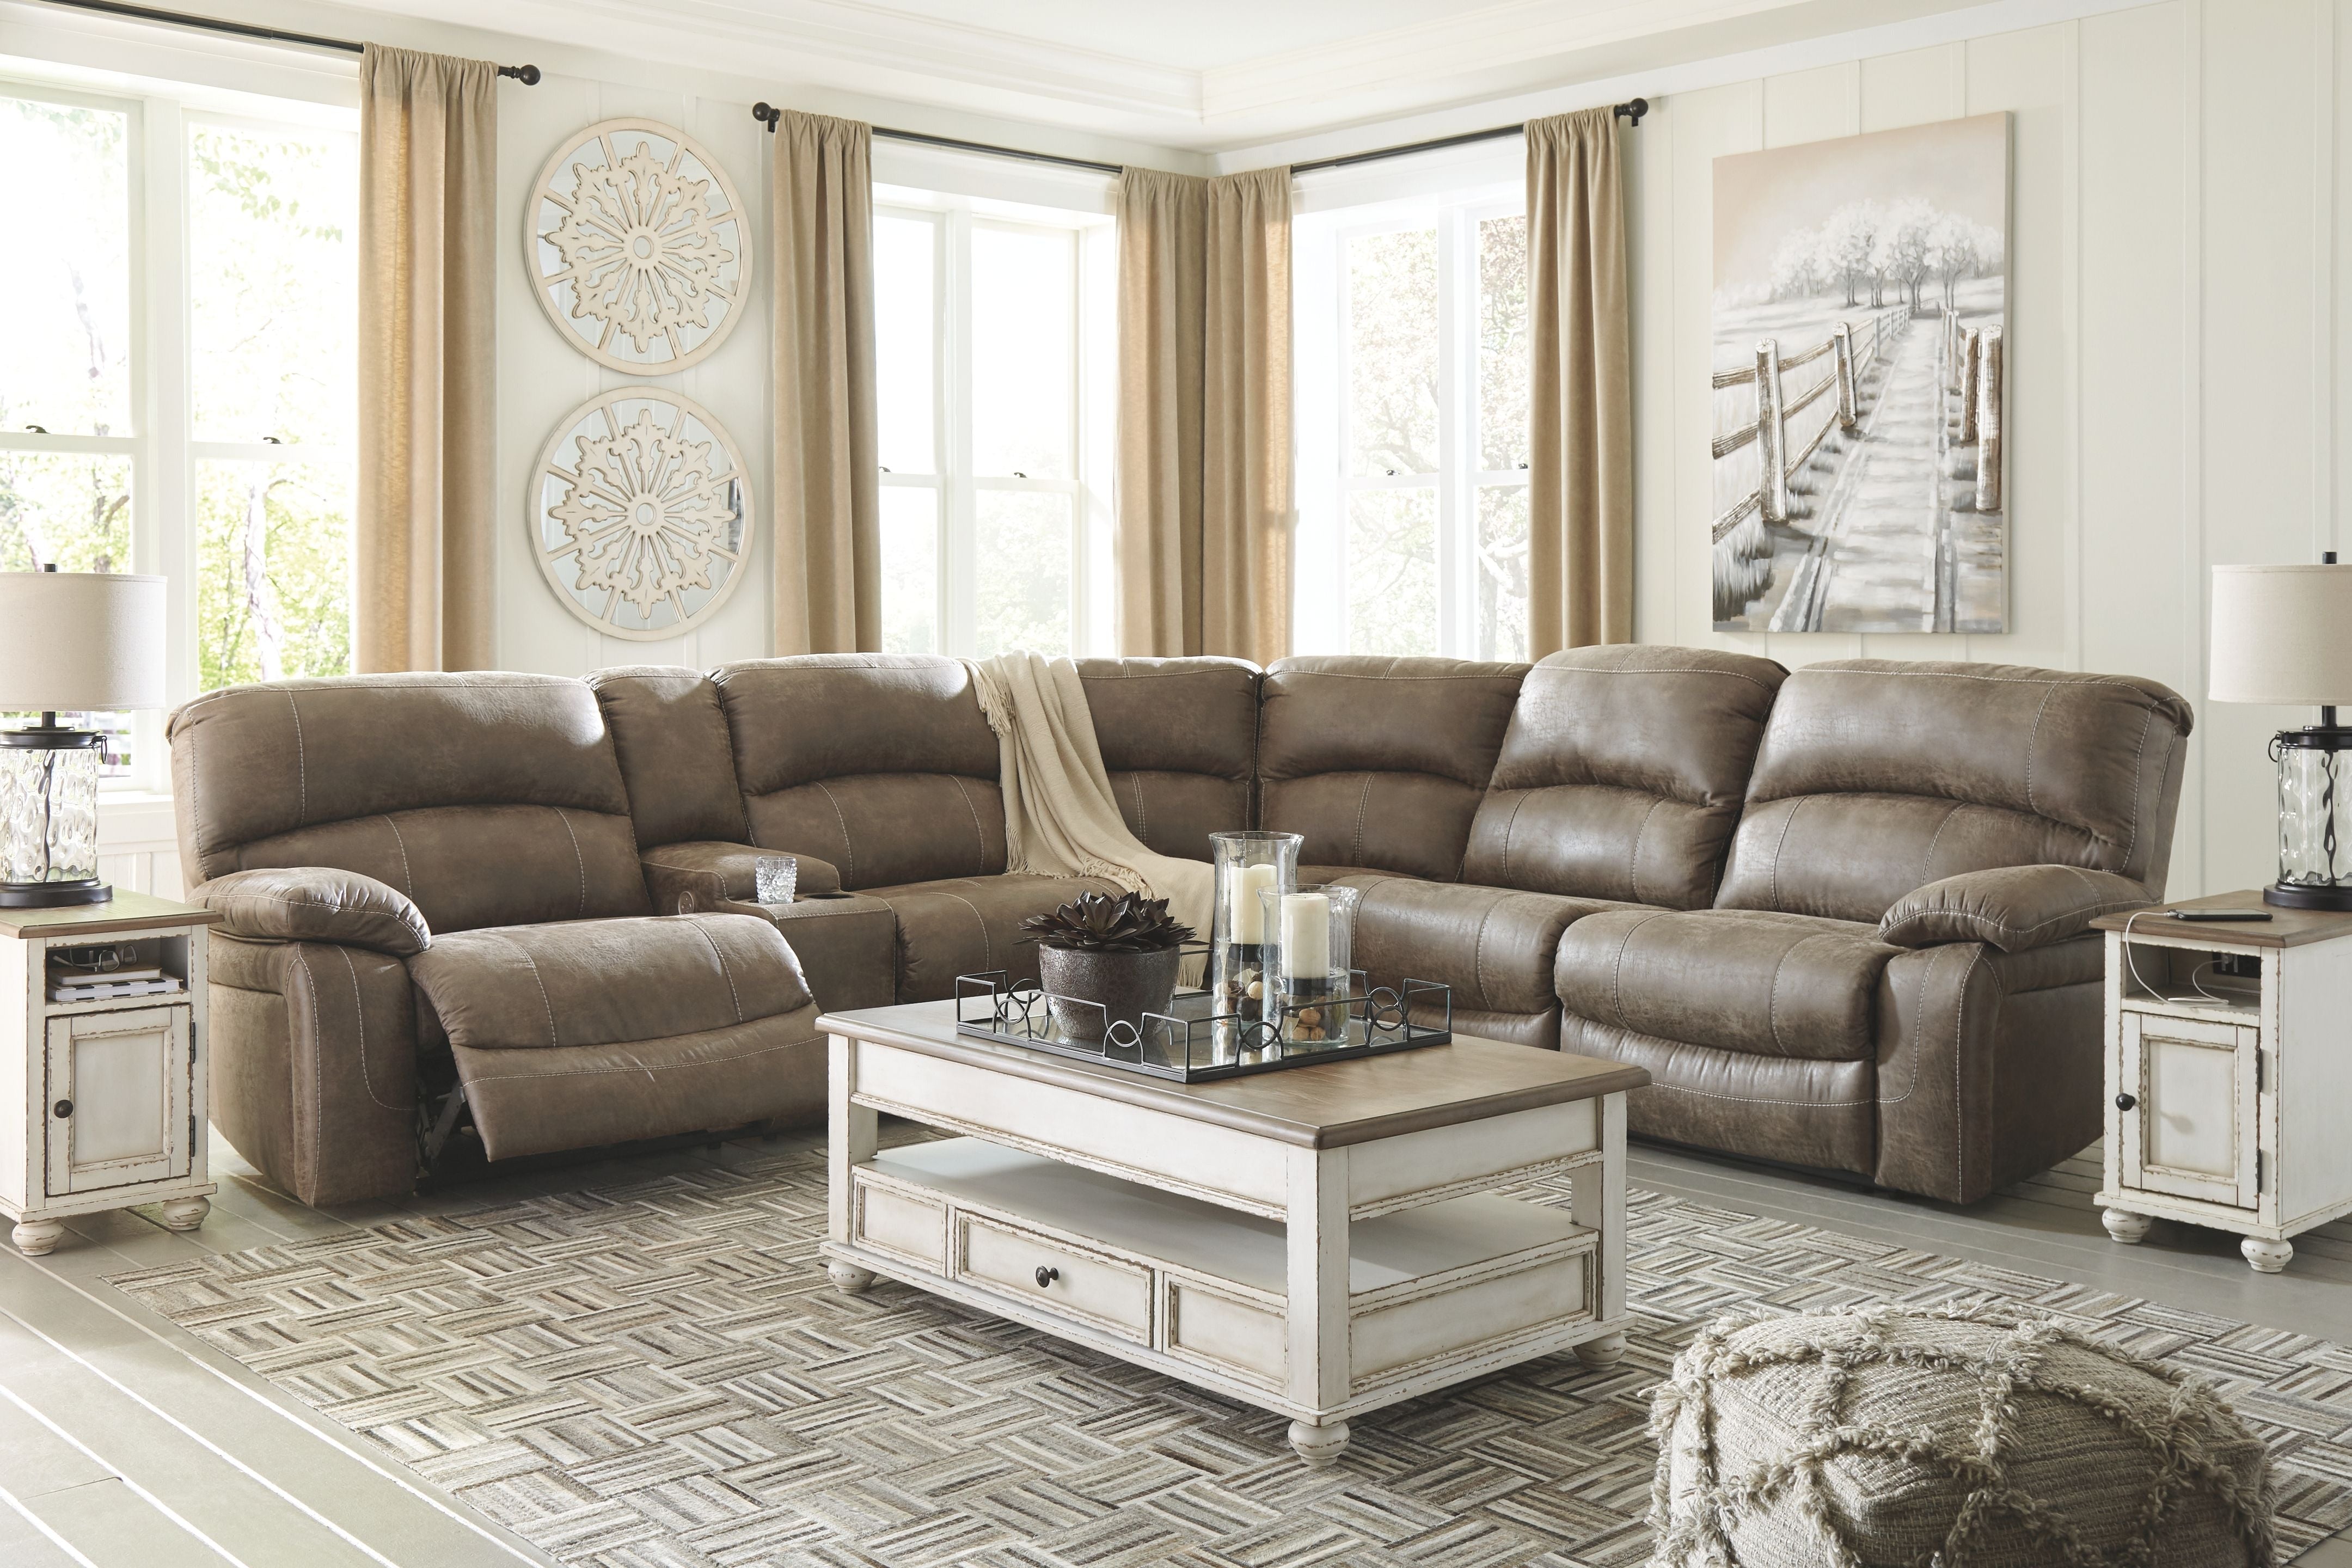 Segburg Driftwood Faux Leather Sectional - Power Reclining Sofa with Console & Cup Holders